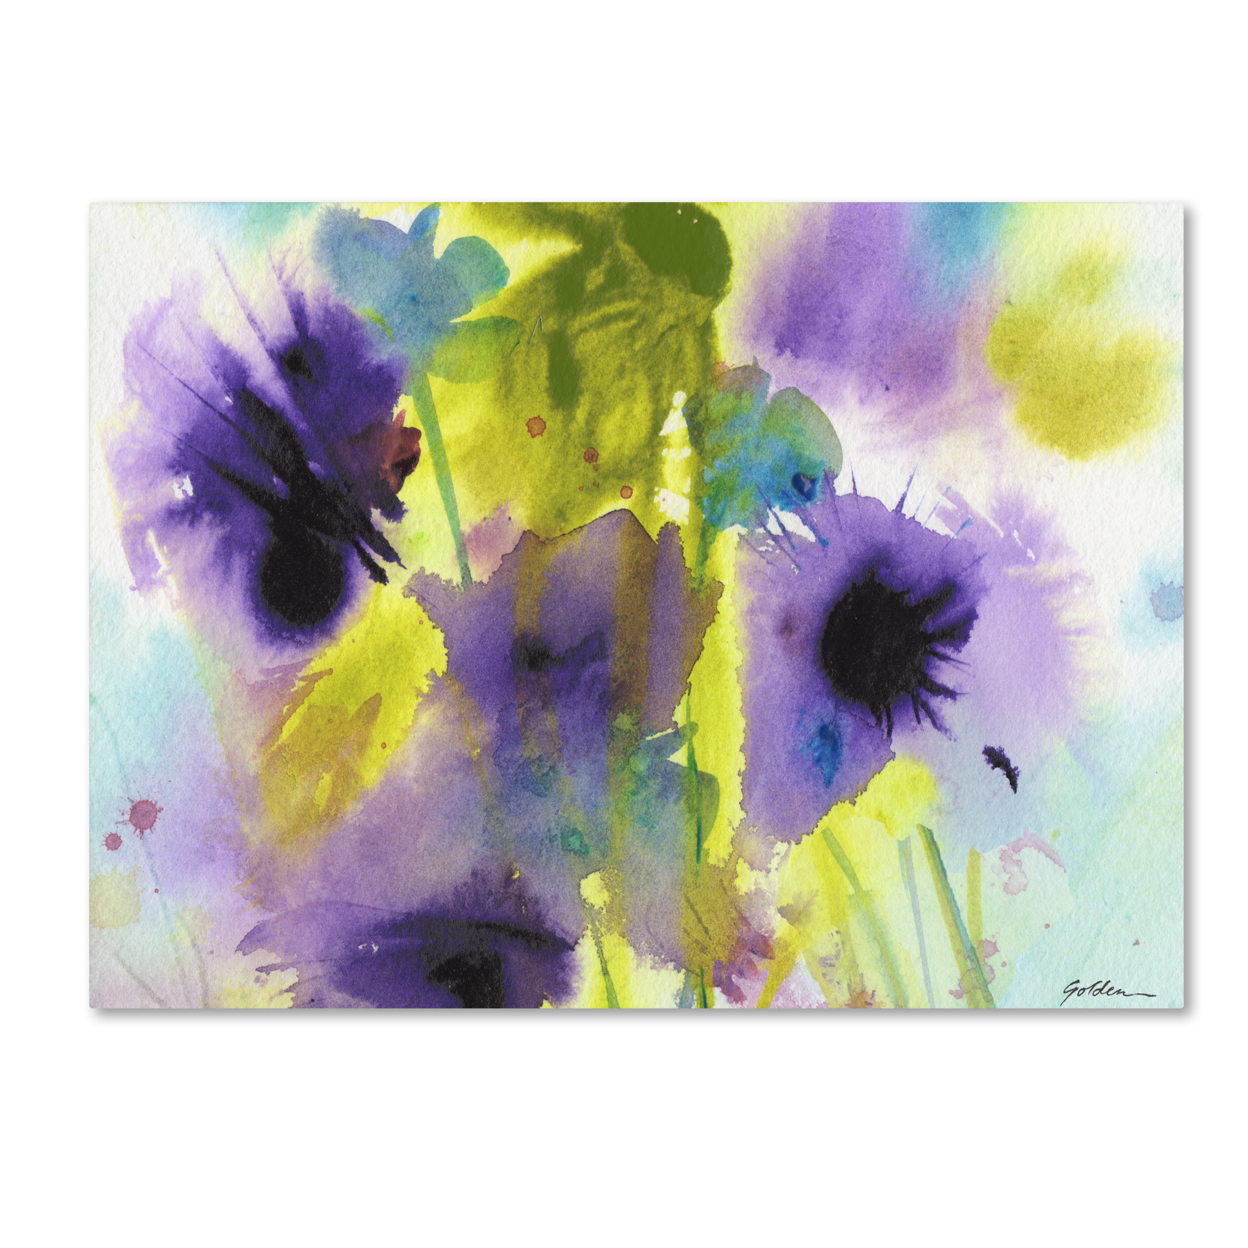 Sheila Golden 'Shades Of Violet' Canvas Wall Art 35 X 47 Inches